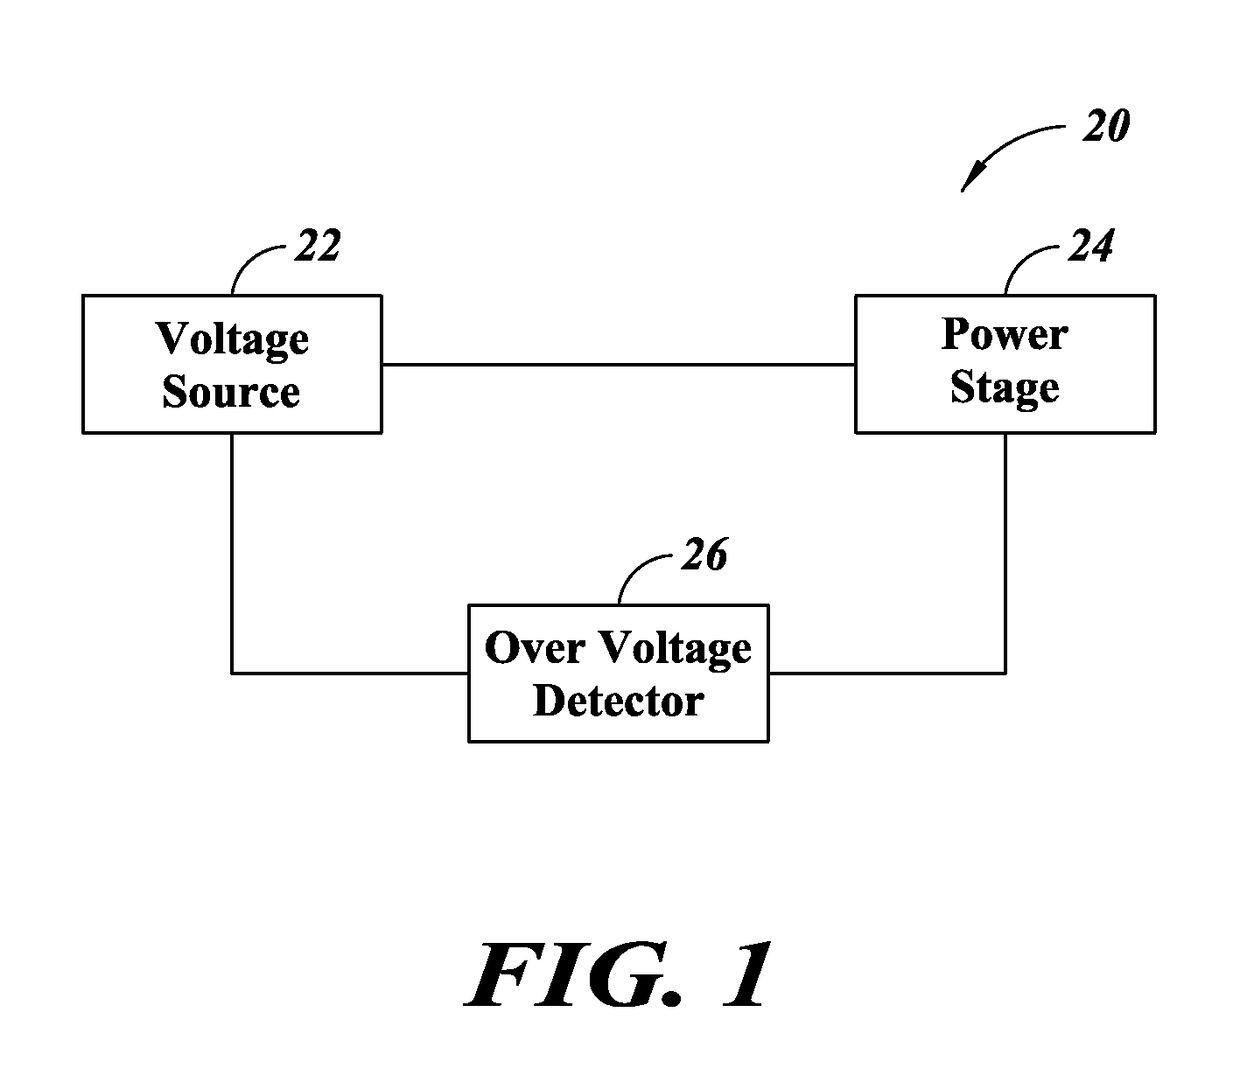 In situ overvoltage protection for active bridge applications